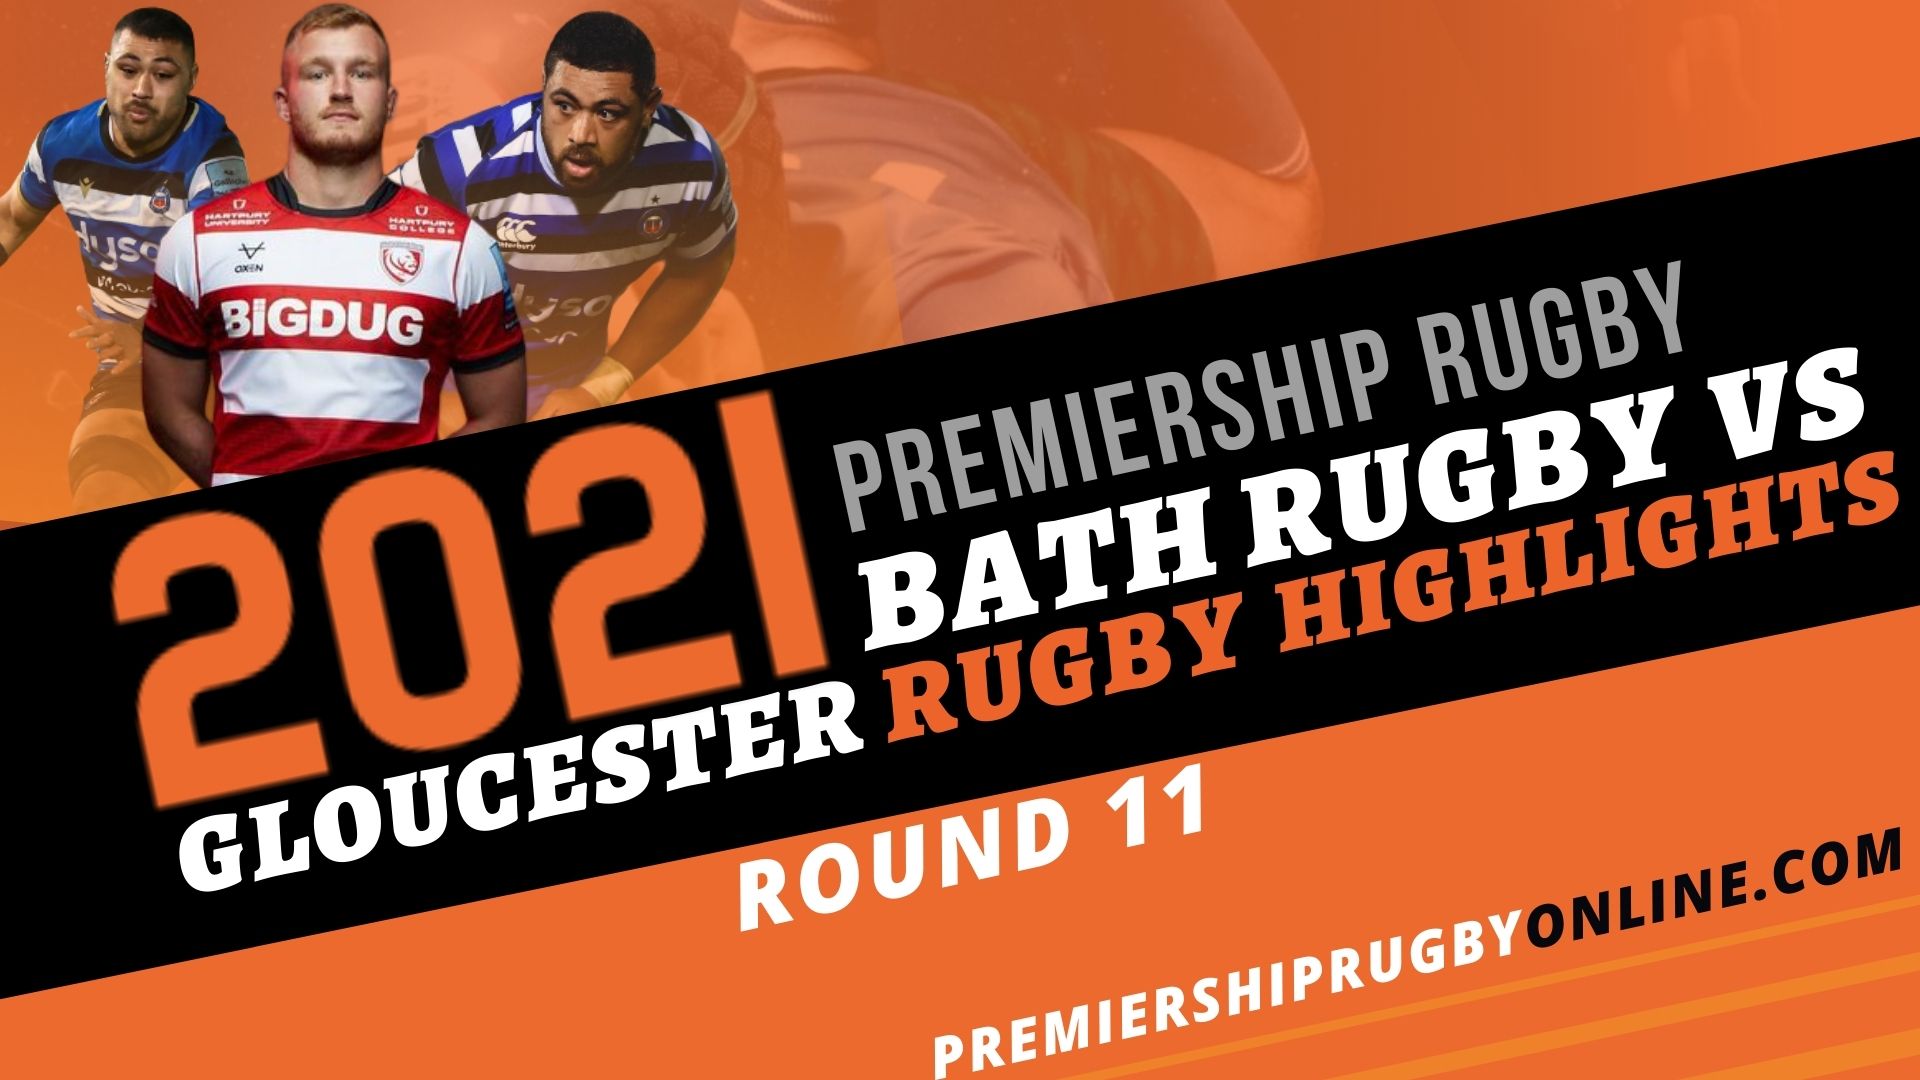 Bath Rugby Vs Gloucester Rugby Highlights 2021 RD 11